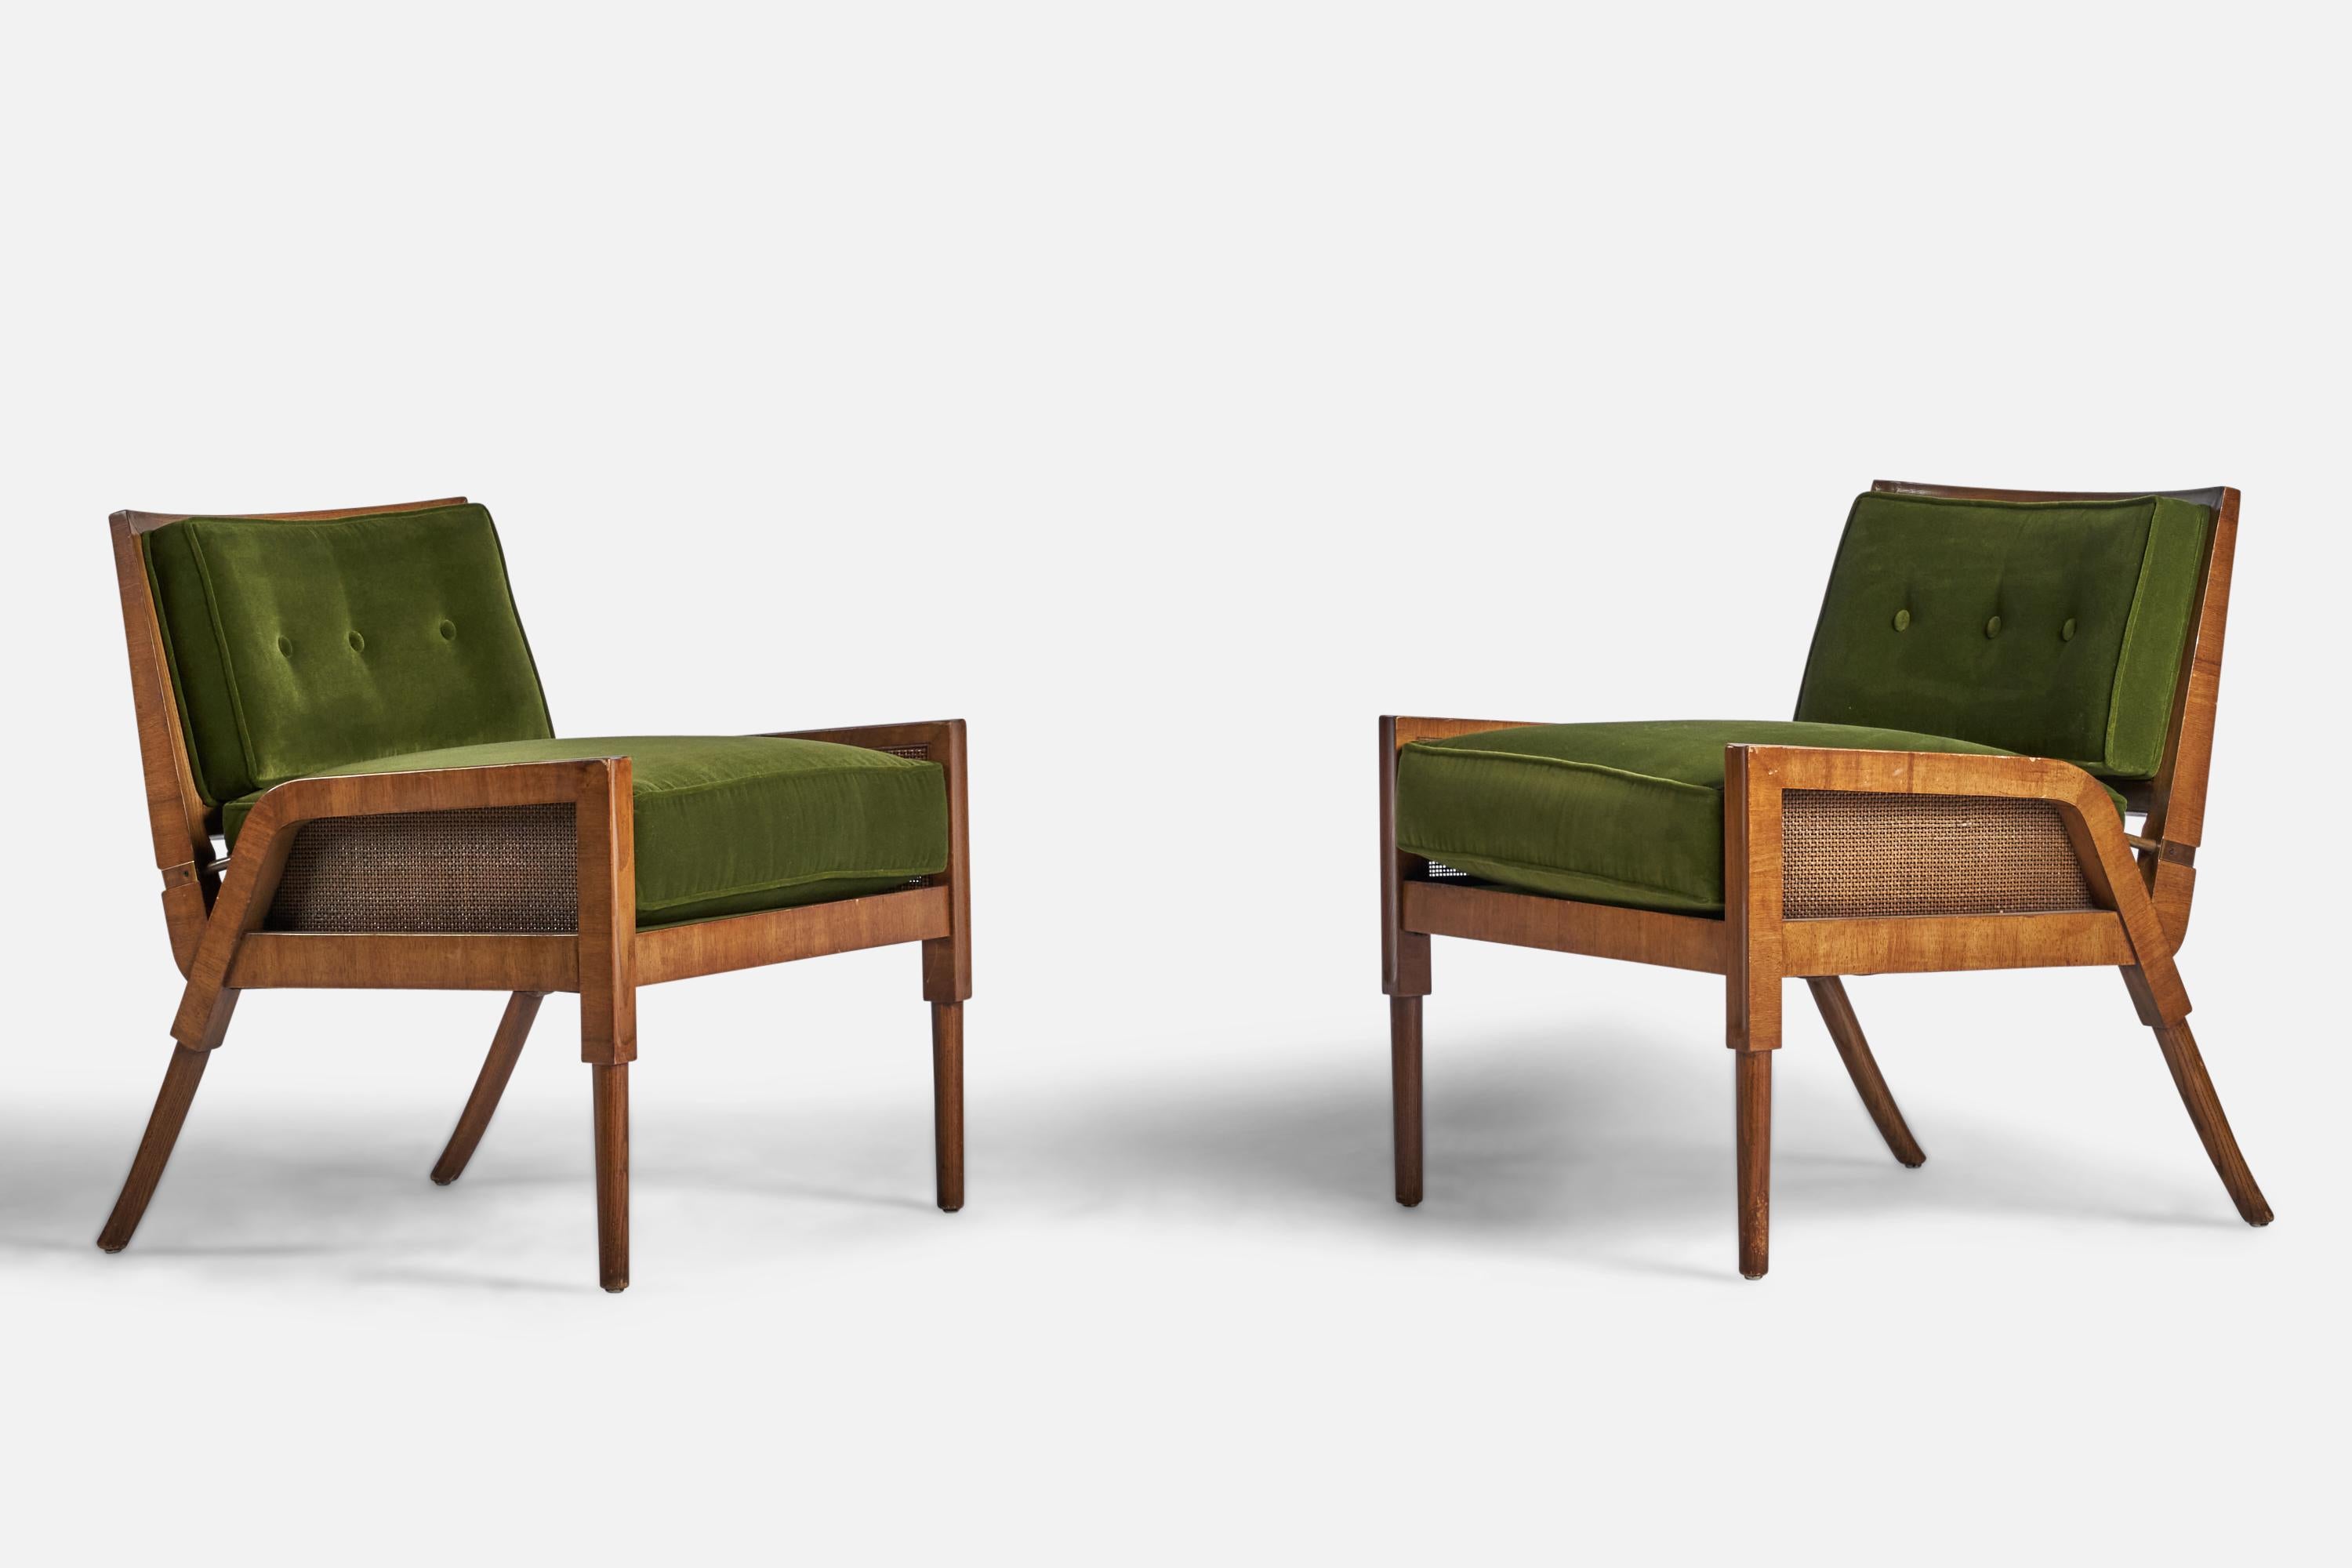 A pair of wood, cane and green velvet fabric lounge chairs designed and produced by Mastercraft, USA, 1940s.
18.5” seat height